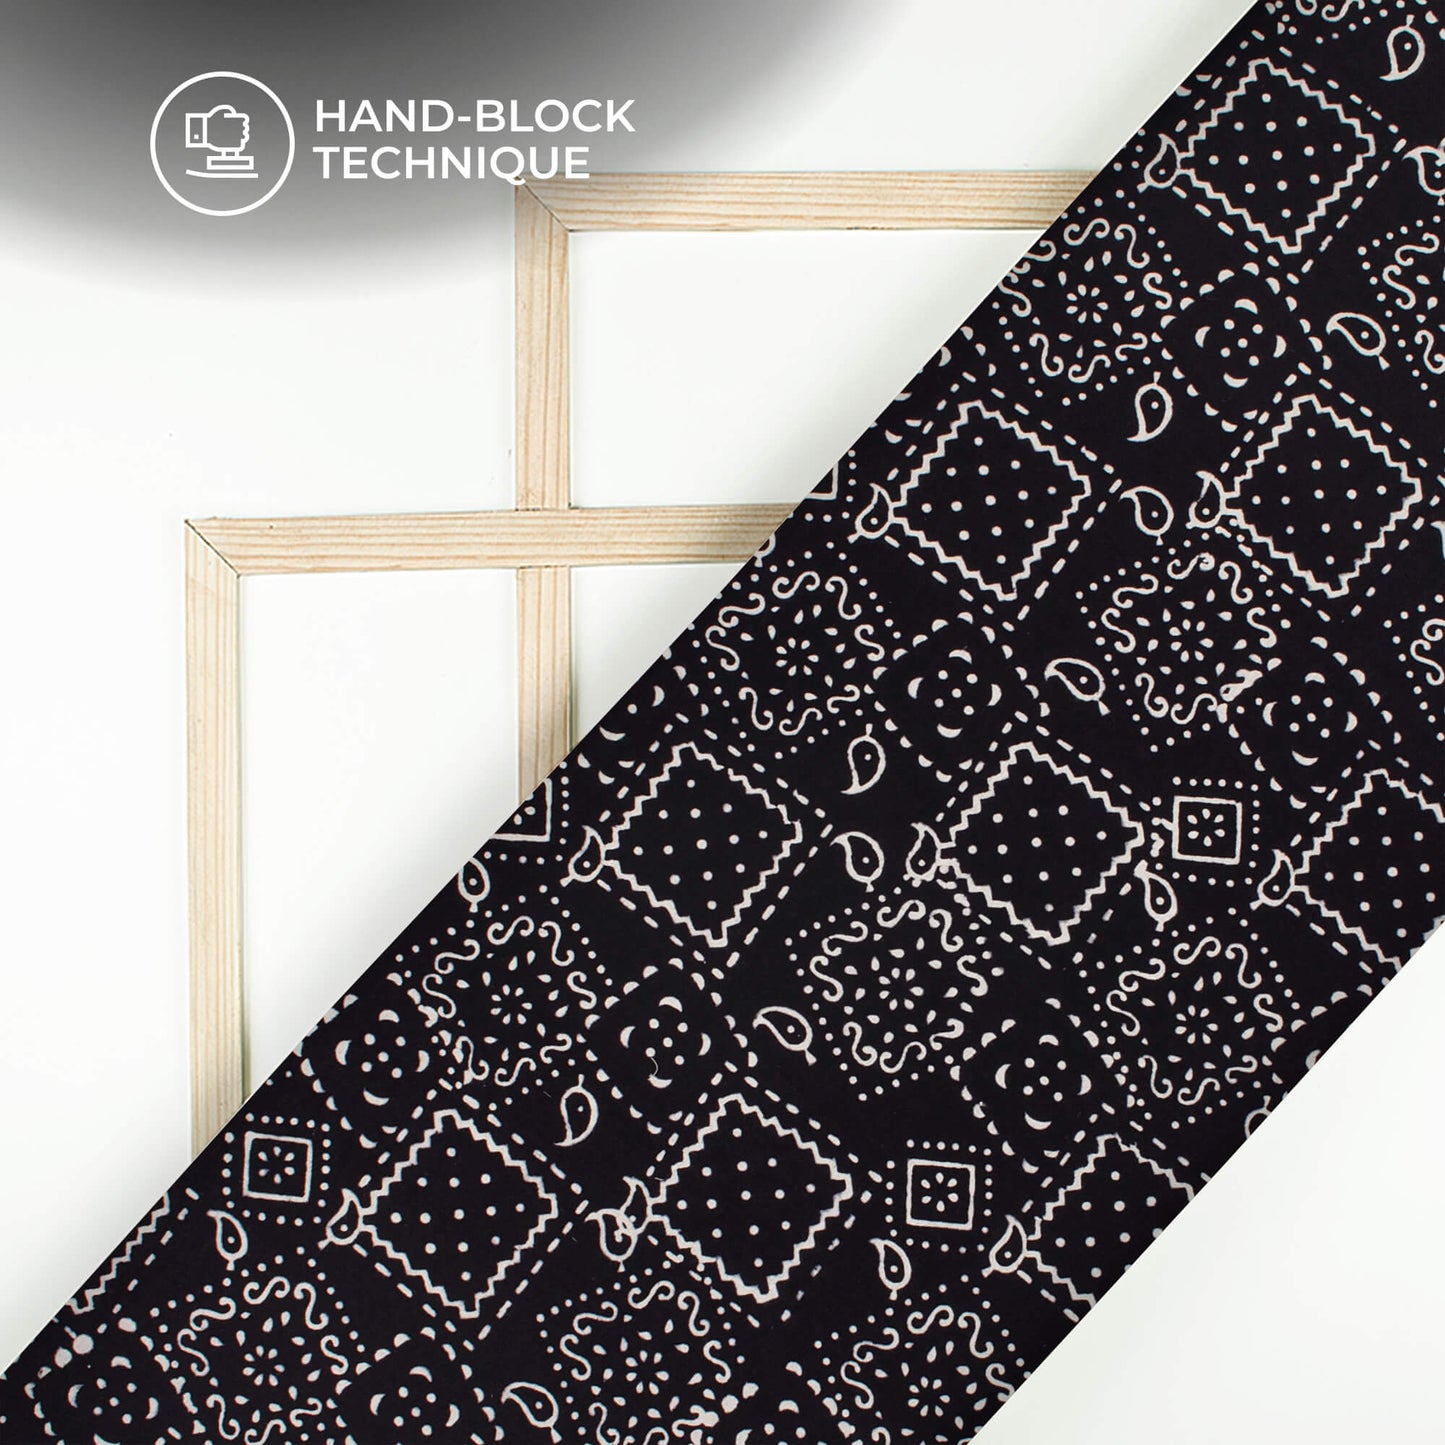 What Is A Hand Block Fabric?